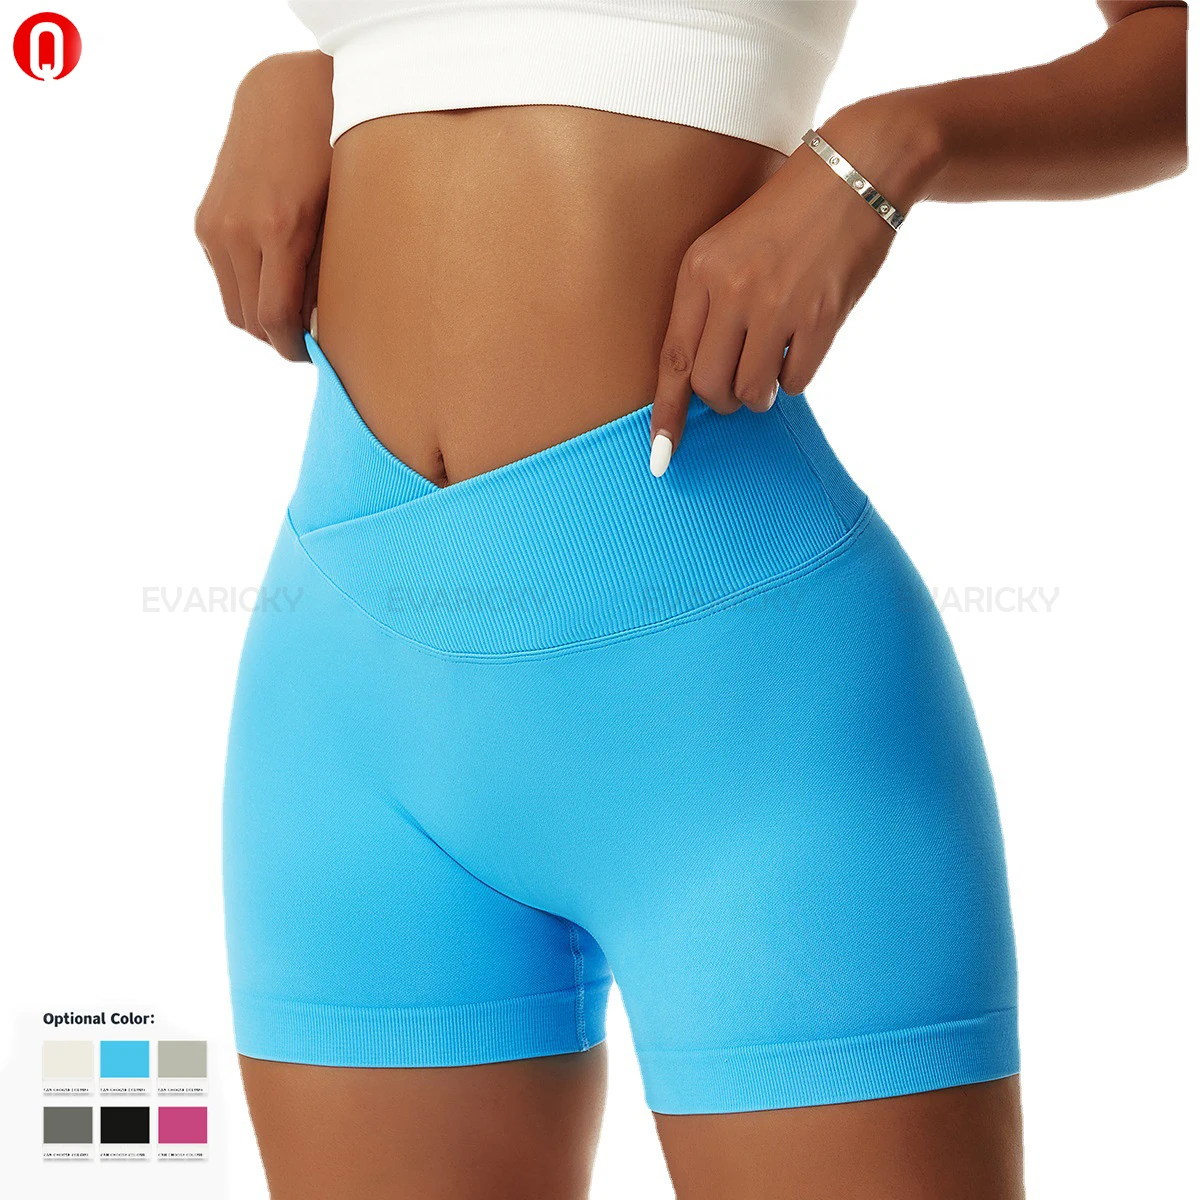 Yoga Work Out Shorts Wholesale